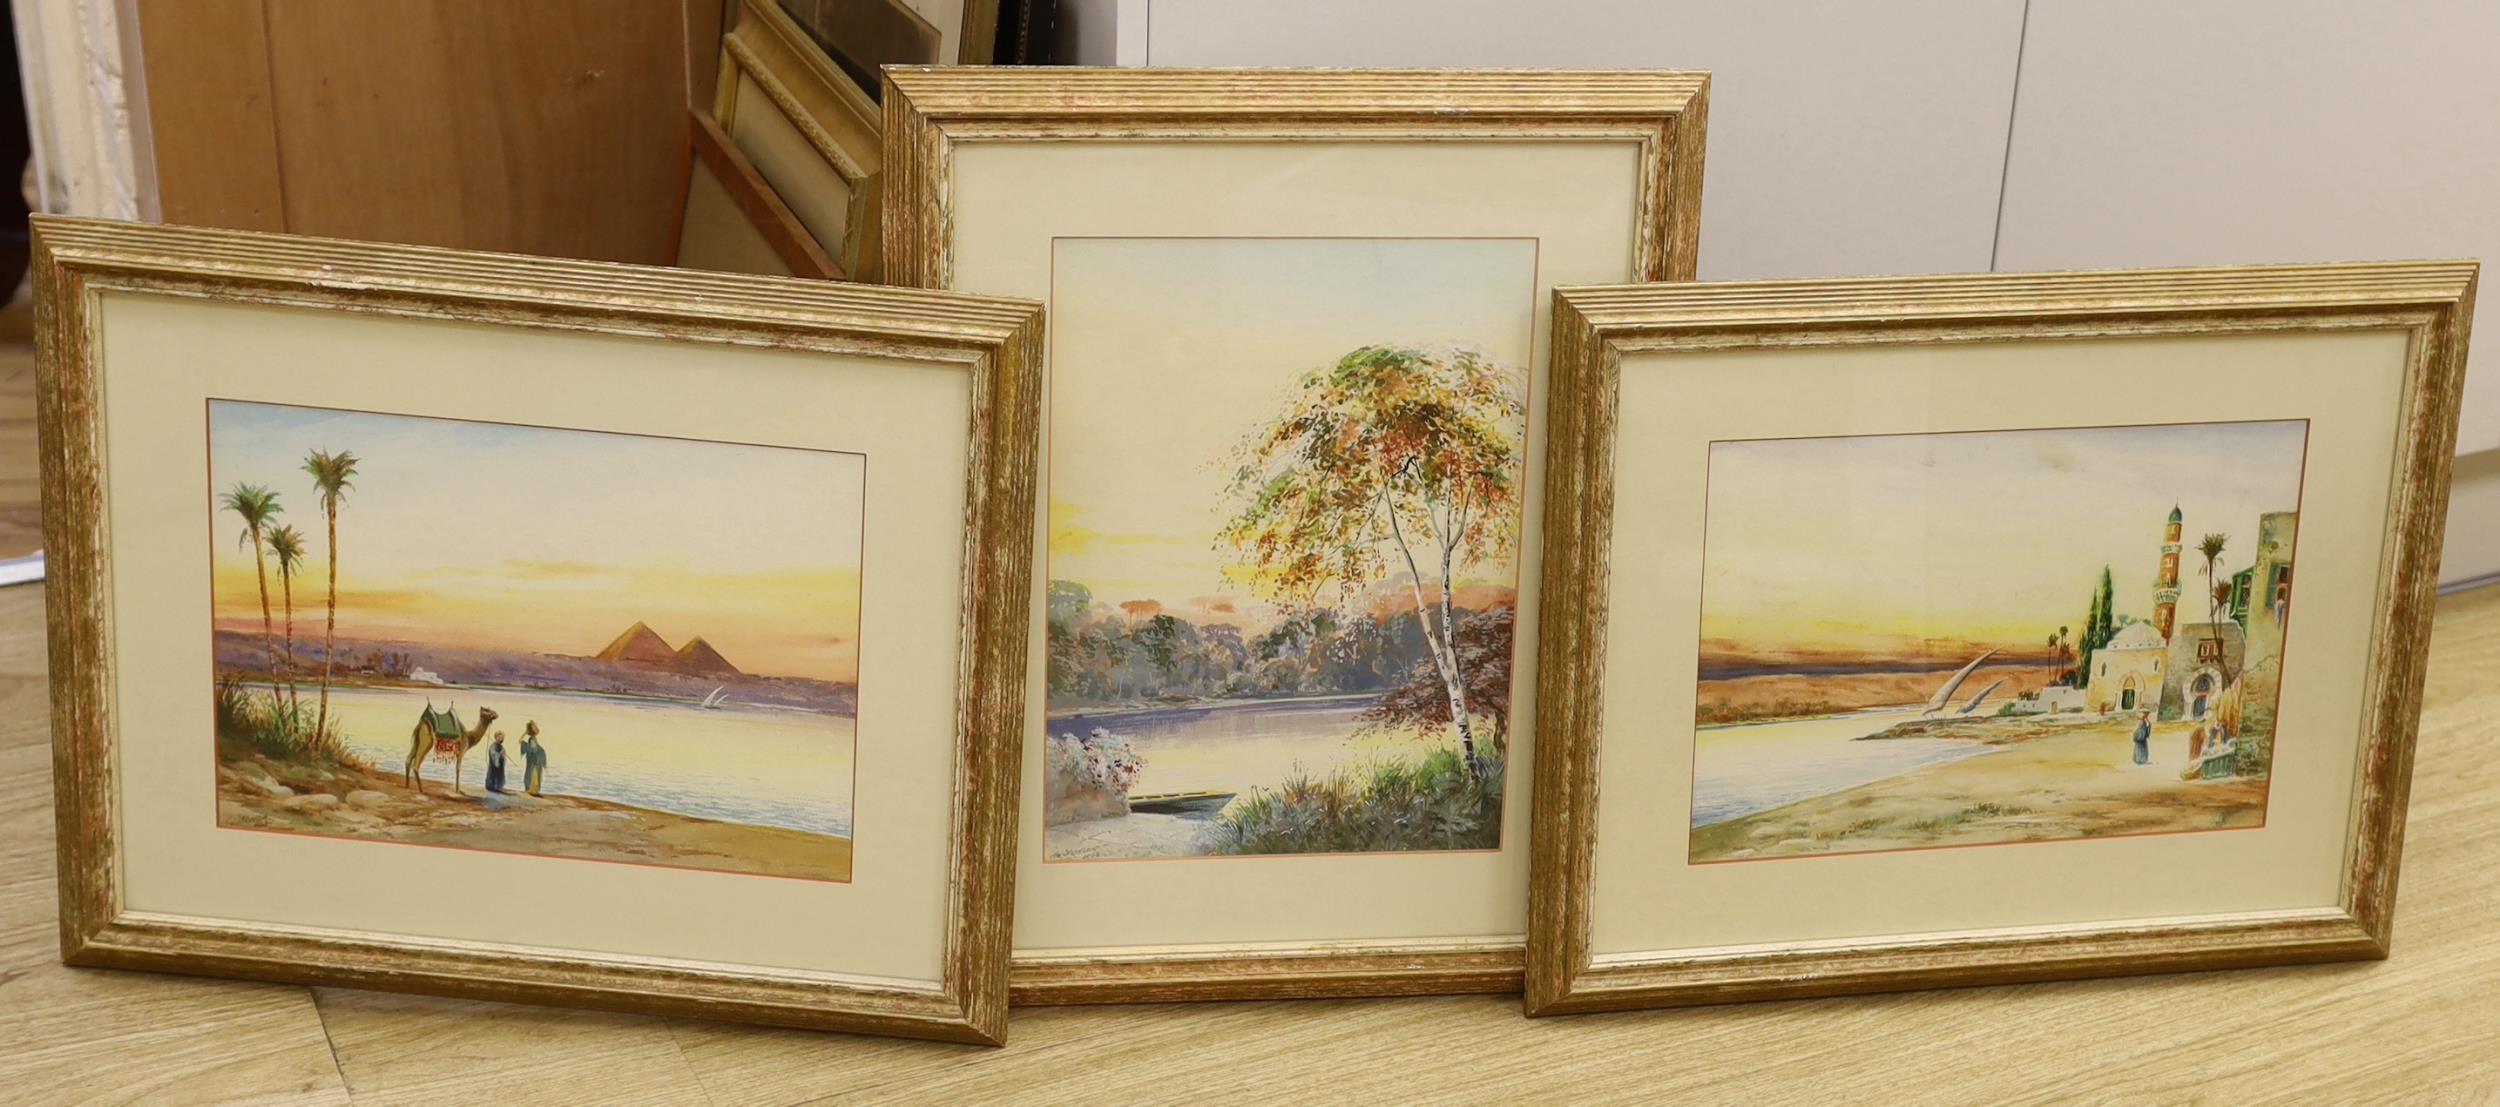 T. W. Atkinson (1942), mid 20th century set of three watercolours, Eastern landscapes with figures